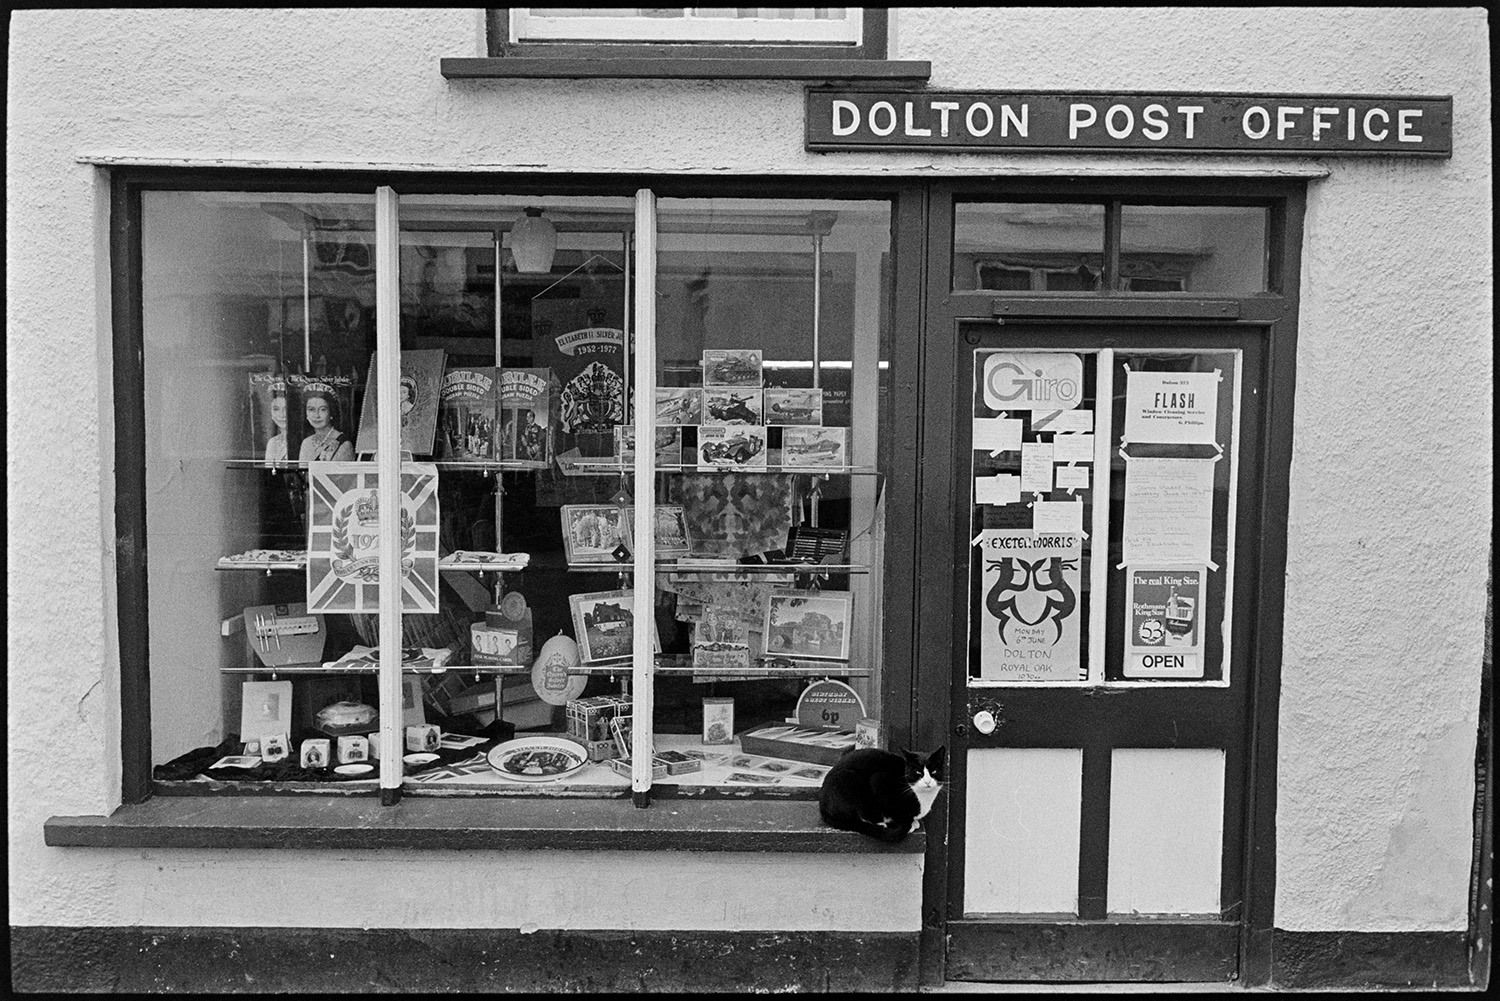 Front of Post Office with display of jubilee souvenirs. 
[The front window of Dolton Post Office decorated with royal souvenirs including plates and tea towels for Queen Elizabeth II Silver Jubilee. A cat is sat on the window sill.]